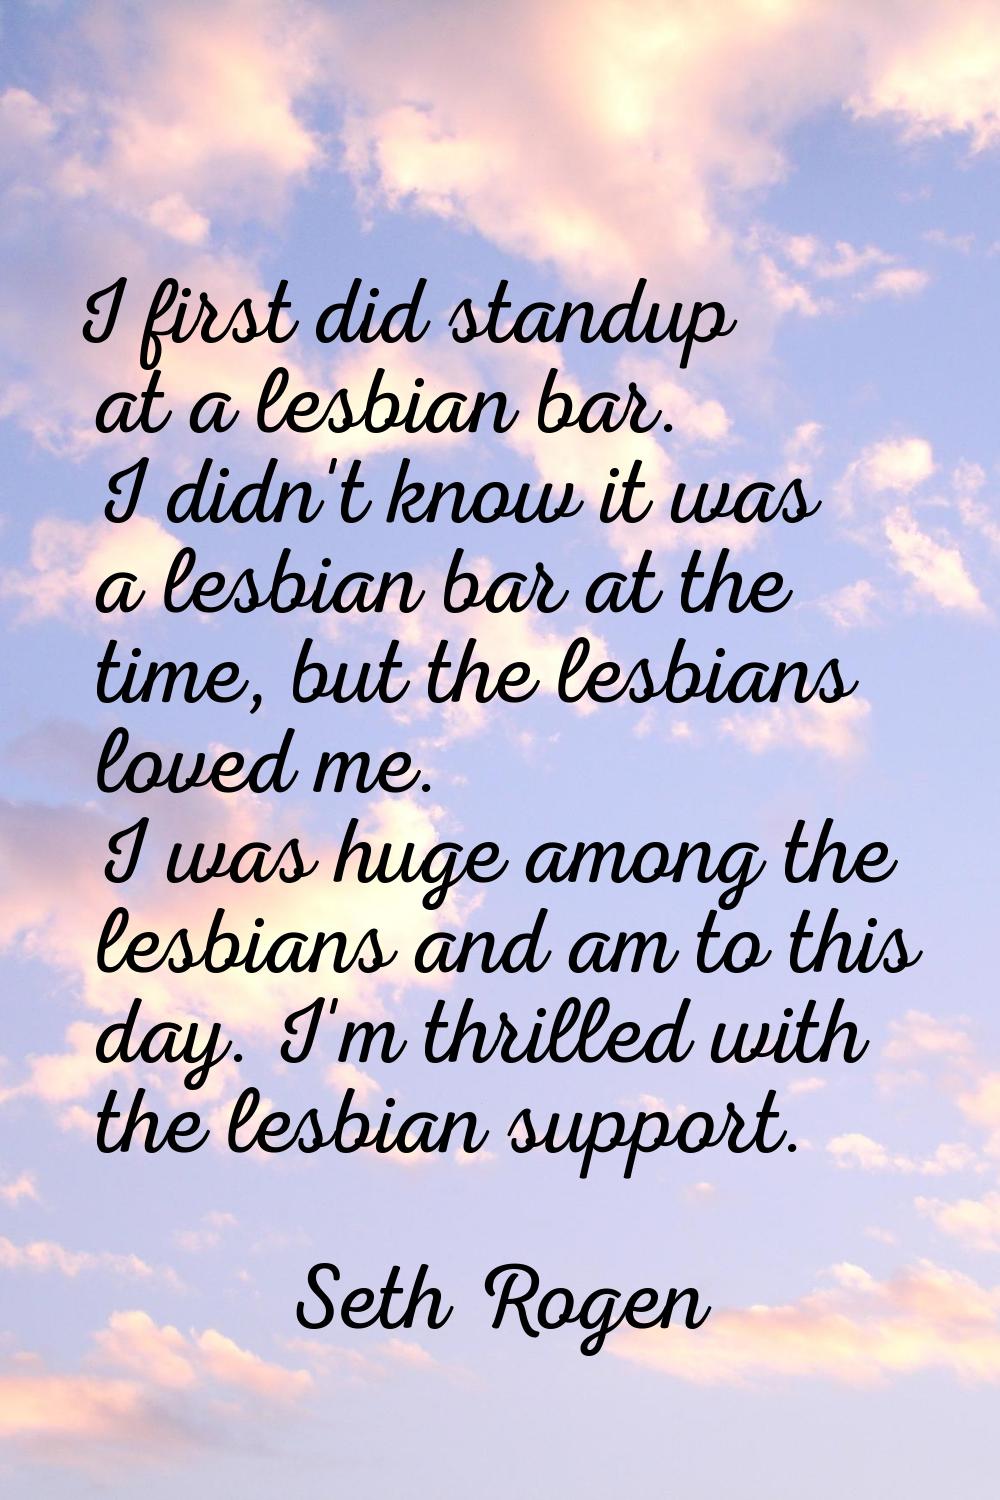 I first did standup at a lesbian bar. I didn't know it was a lesbian bar at the time, but the lesbi